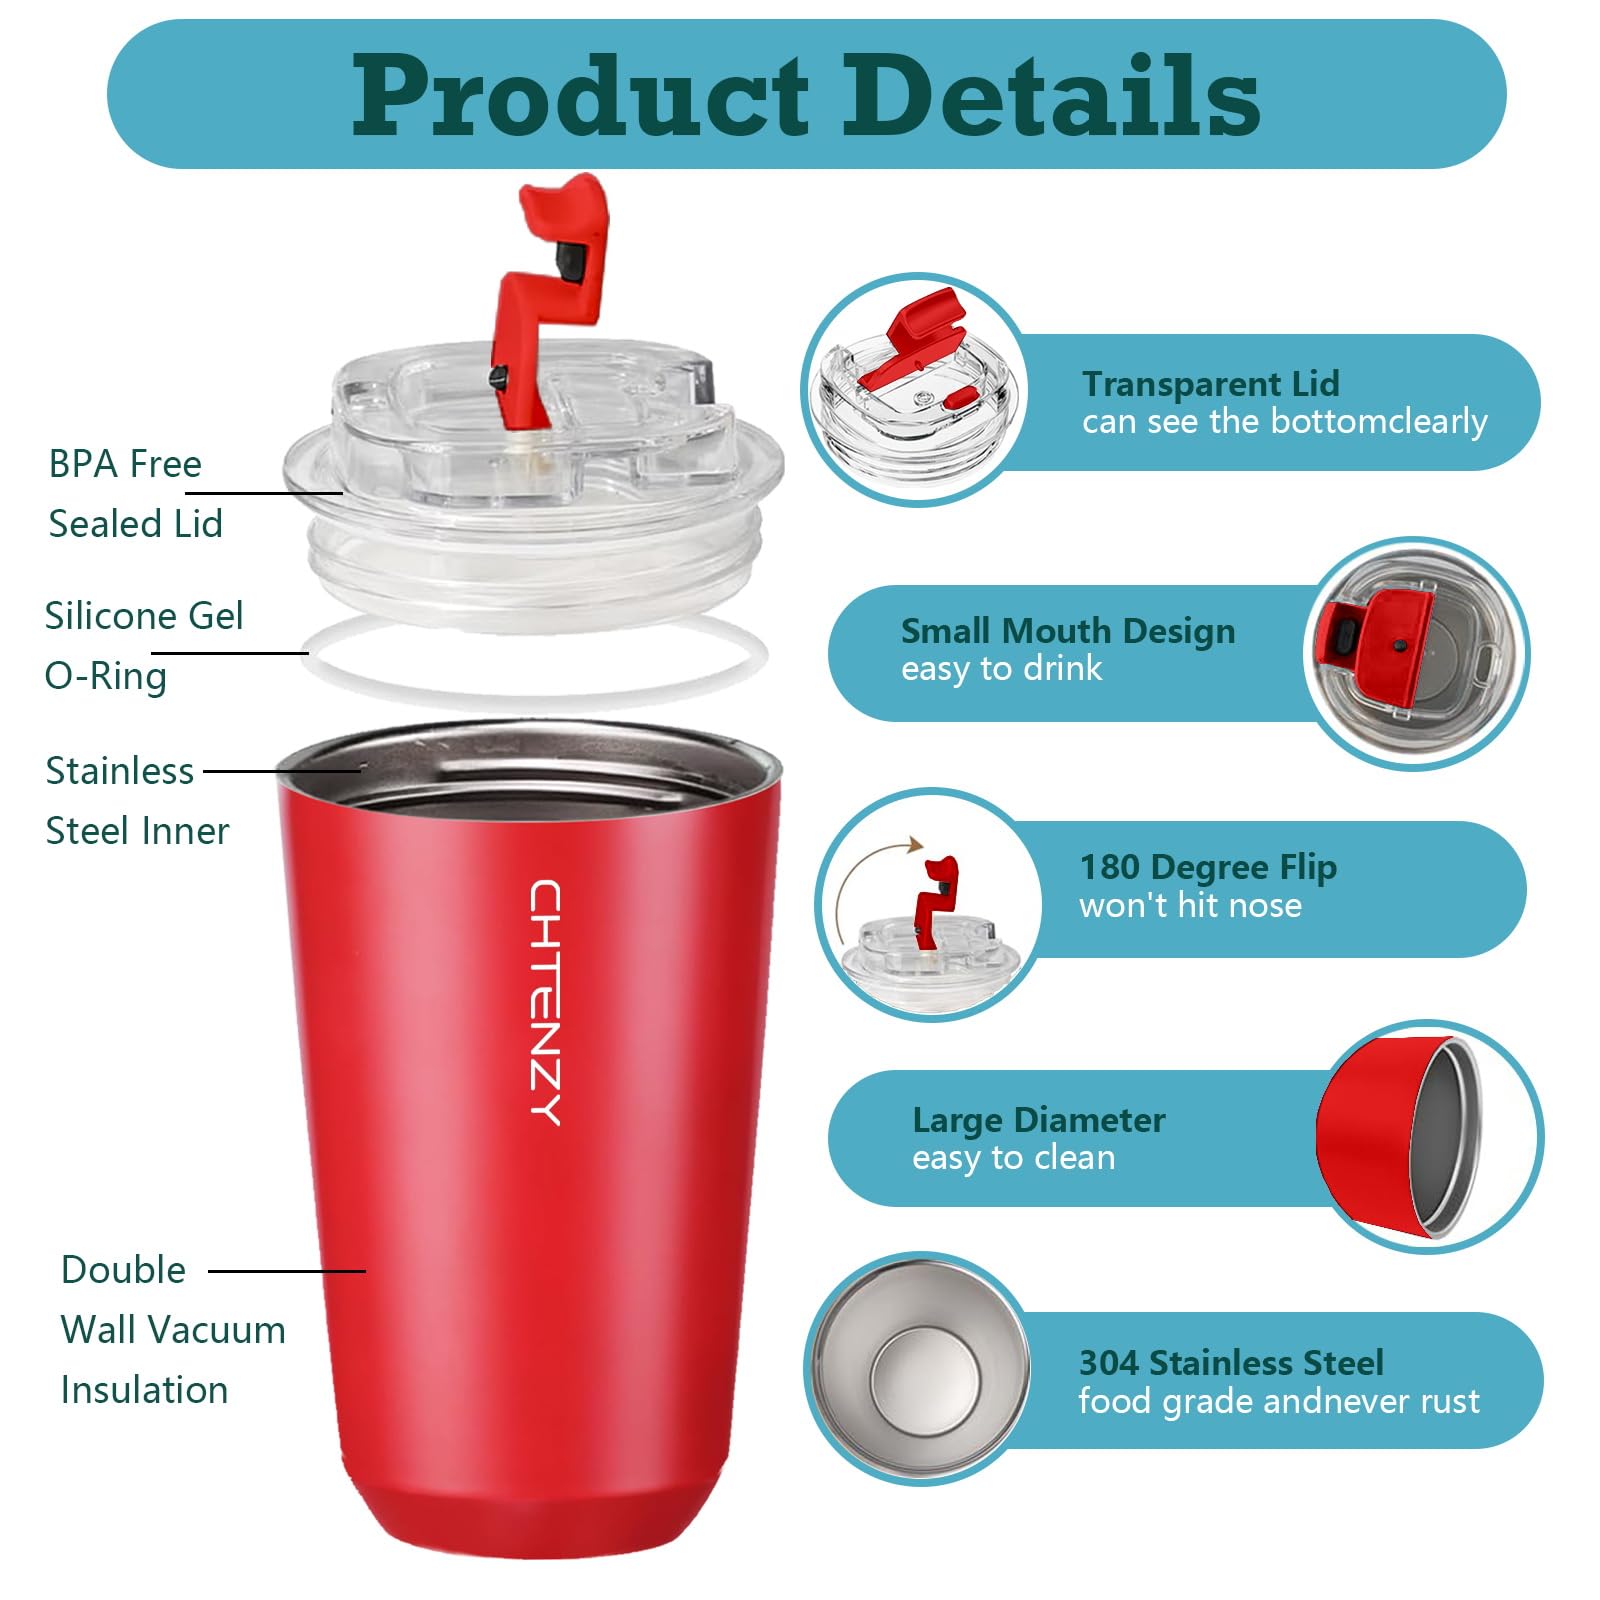 CHTENZY Insulated Coffee Mug,Spill Proof Travel Coffee Cup With Lid, Red Coffee Thermos,Stainless Steel Double Wall Vacuum Cup,Reusable For Coffee Tumbler (Red,13oz)